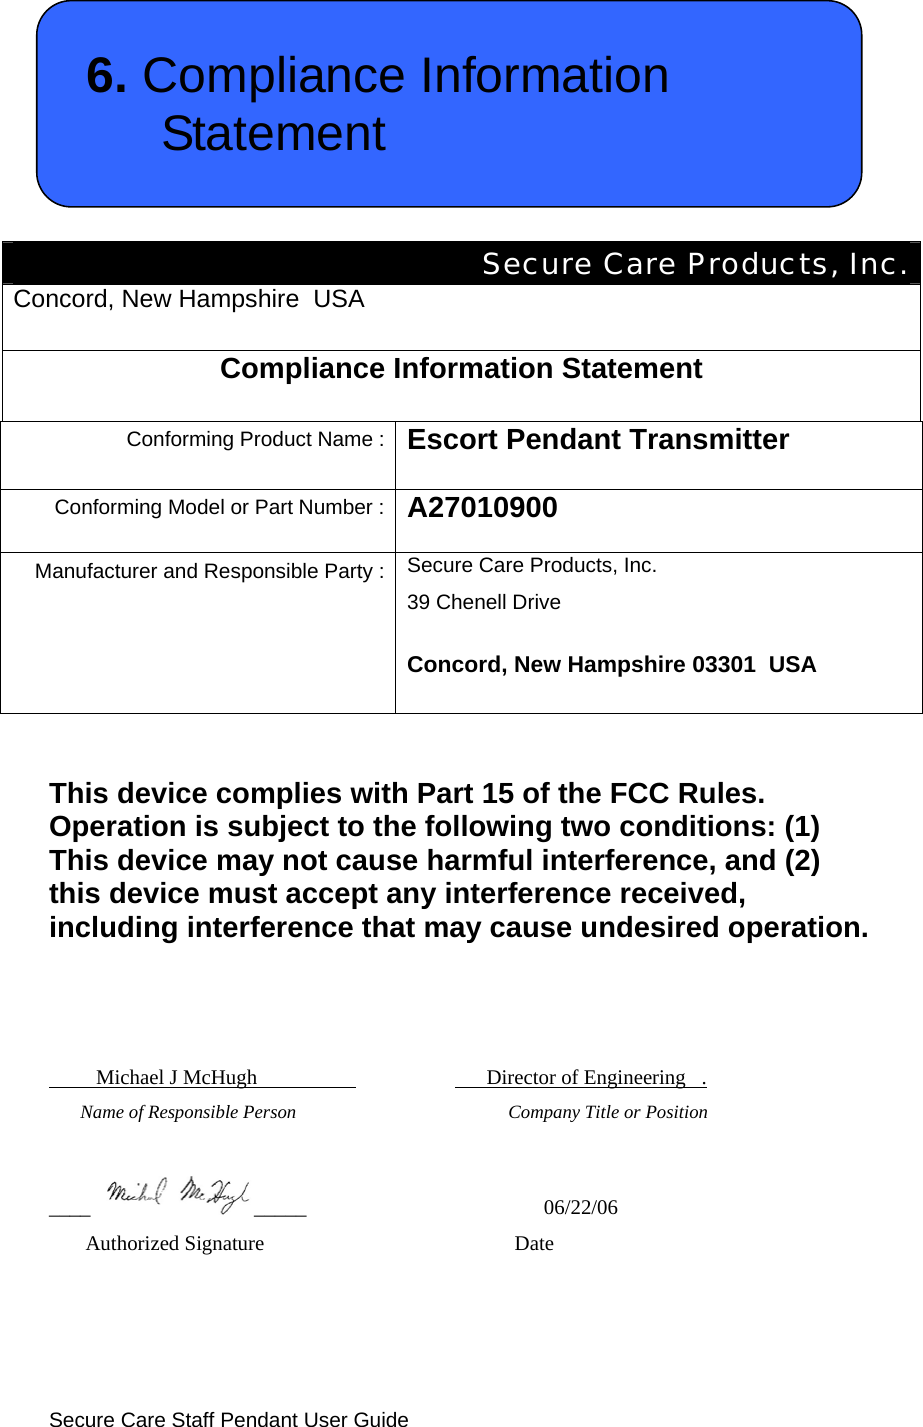  Secure Care Staff Pendant User Guide  6. Compliance Information Statement   Secure Care Products, Inc. Concord, New Hampshire  USA  Compliance Information Statement  Conforming Product Name : Escort Pendant Transmitter  Conforming Model or Part Number : A27010900  Manufacturer and Responsible Party : Secure Care Products, Inc. 39 Chenell Drive Concord, New Hampshire 03301  USA   This device complies with Part 15 of the FCC Rules. Operation is subject to the following two conditions: (1) This device may not cause harmful interference, and (2) this device must accept any interference received, including interference that may cause undesired operation.             Michael J McHugh                                 Director of Engineering   .       Name of Responsible Person                                       Company Title or Position  ____ _____                           06/22/06        Authorized Signature           Date  